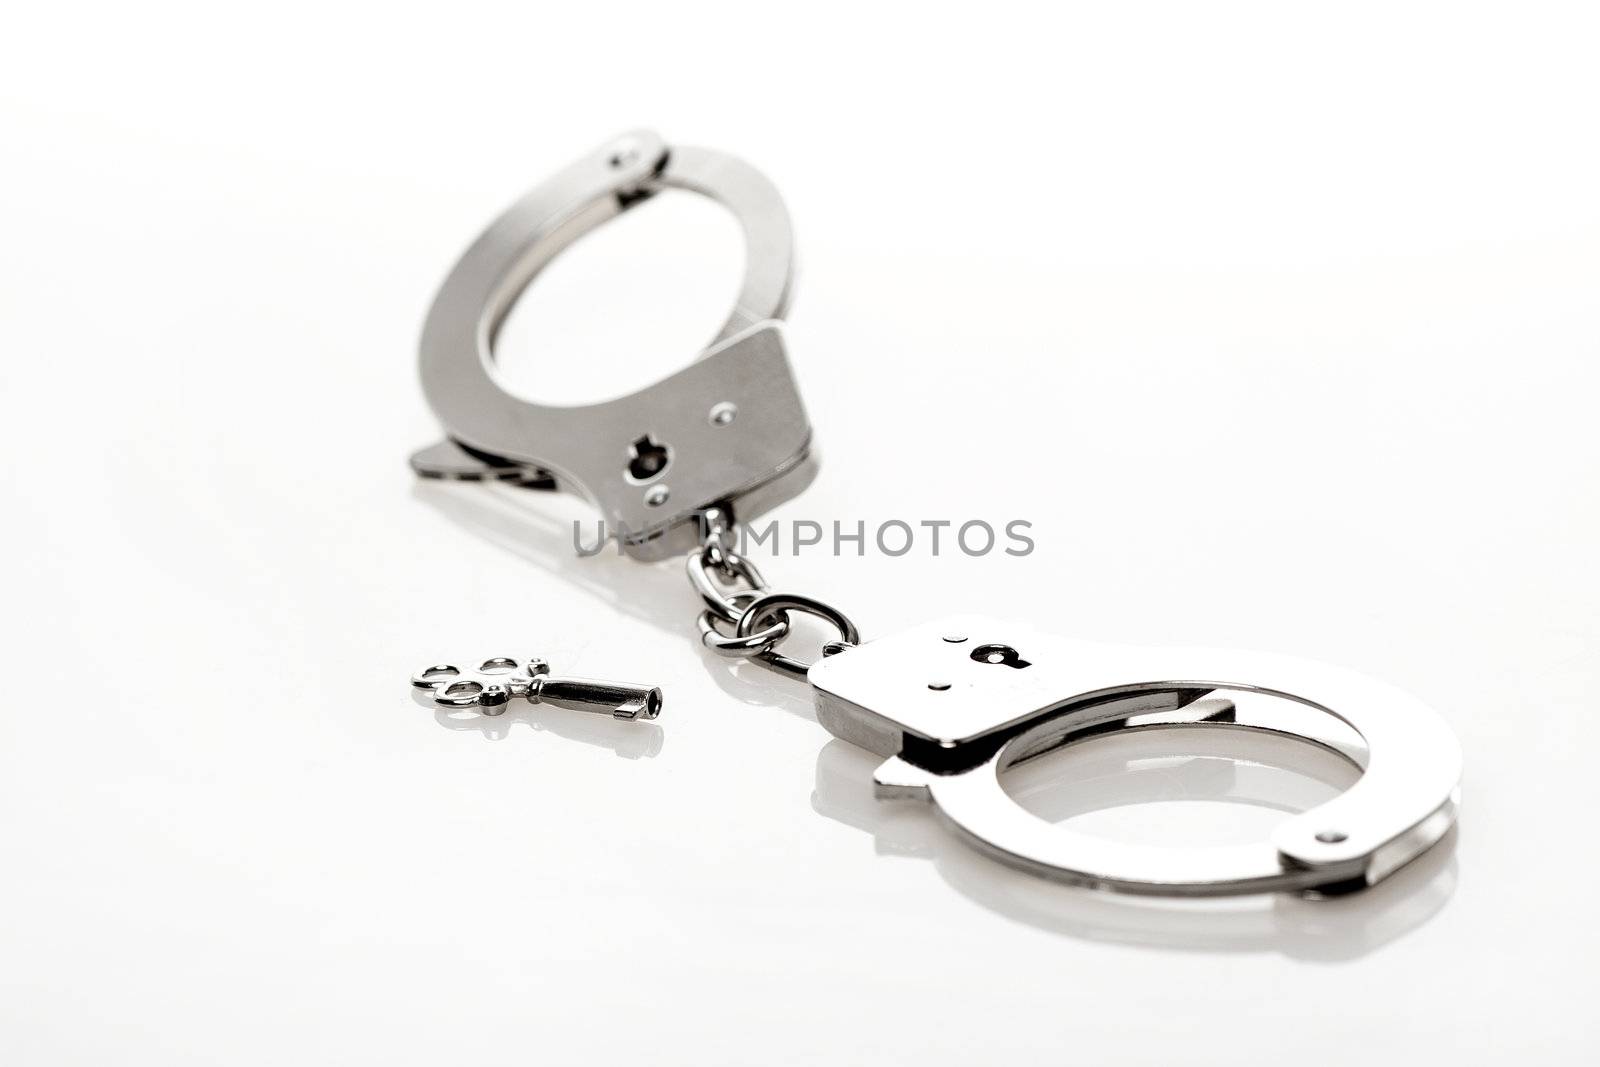 Handcuffs made of metal with a small key isolated on white